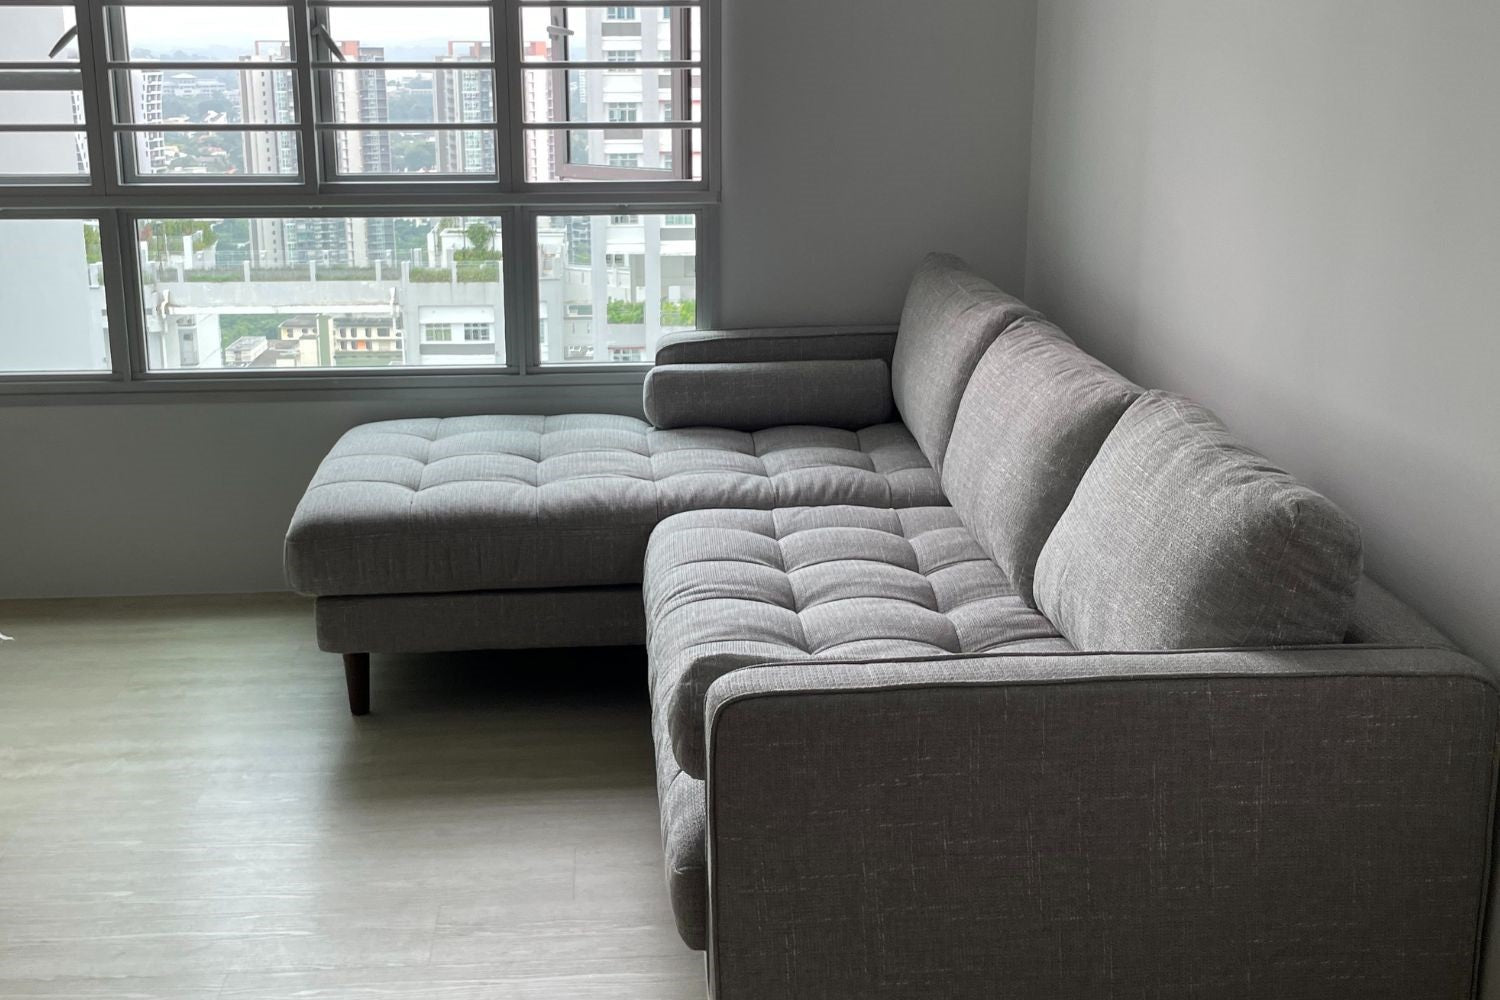 Castle 240cm grey fabric sectional sofa in real customer homes